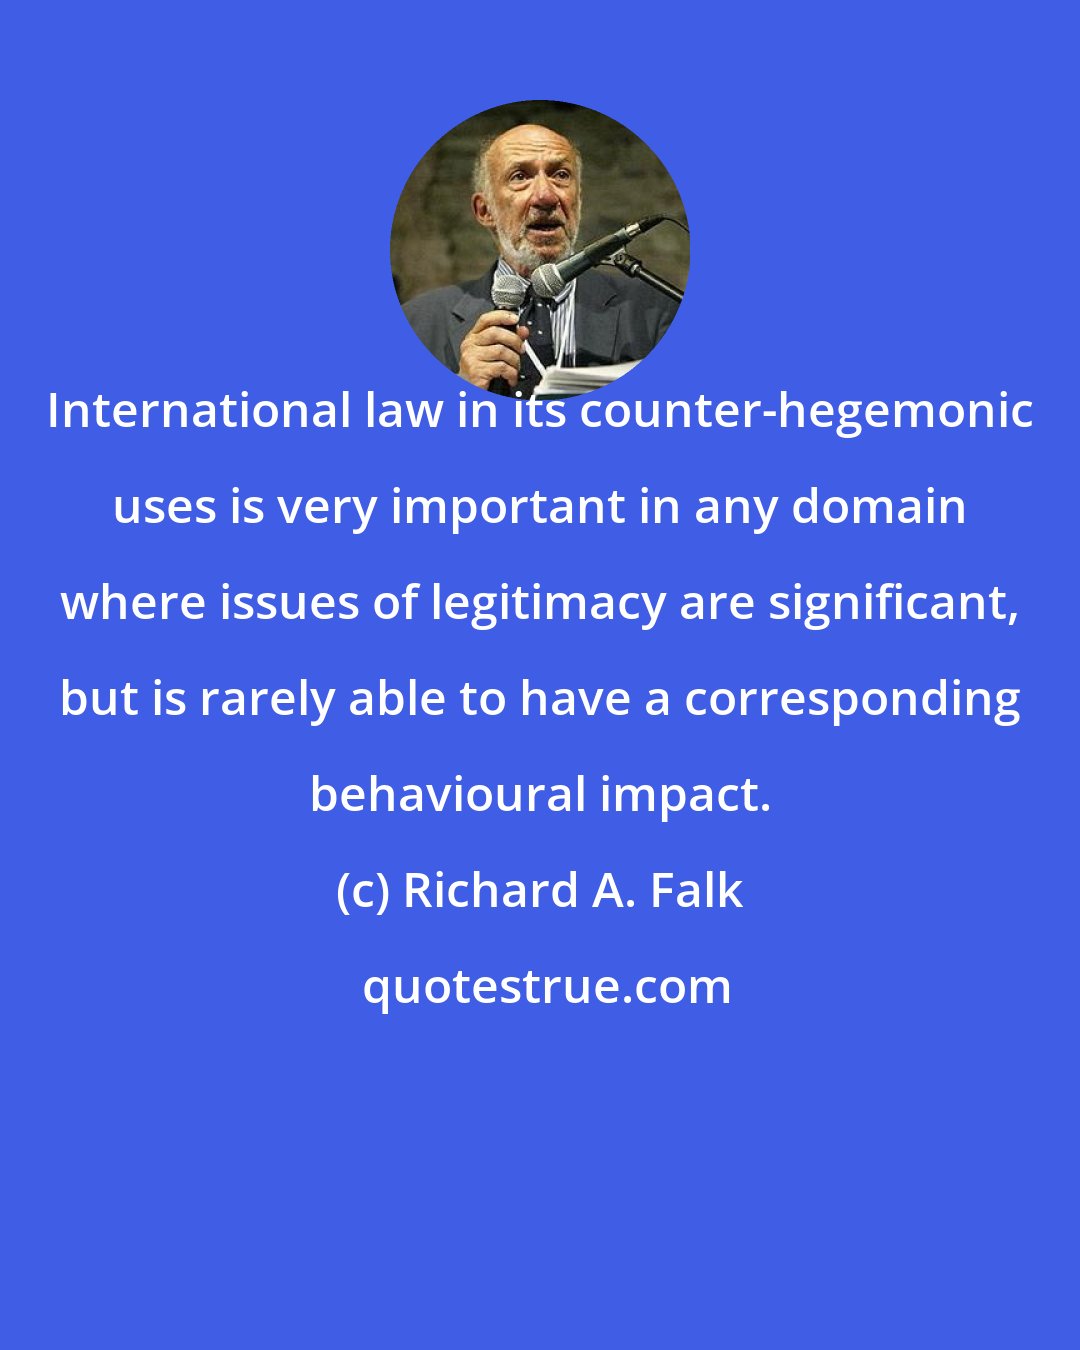 Richard A. Falk: International law in its counter-hegemonic uses is very important in any domain where issues of legitimacy are significant, but is rarely able to have a corresponding behavioural impact.